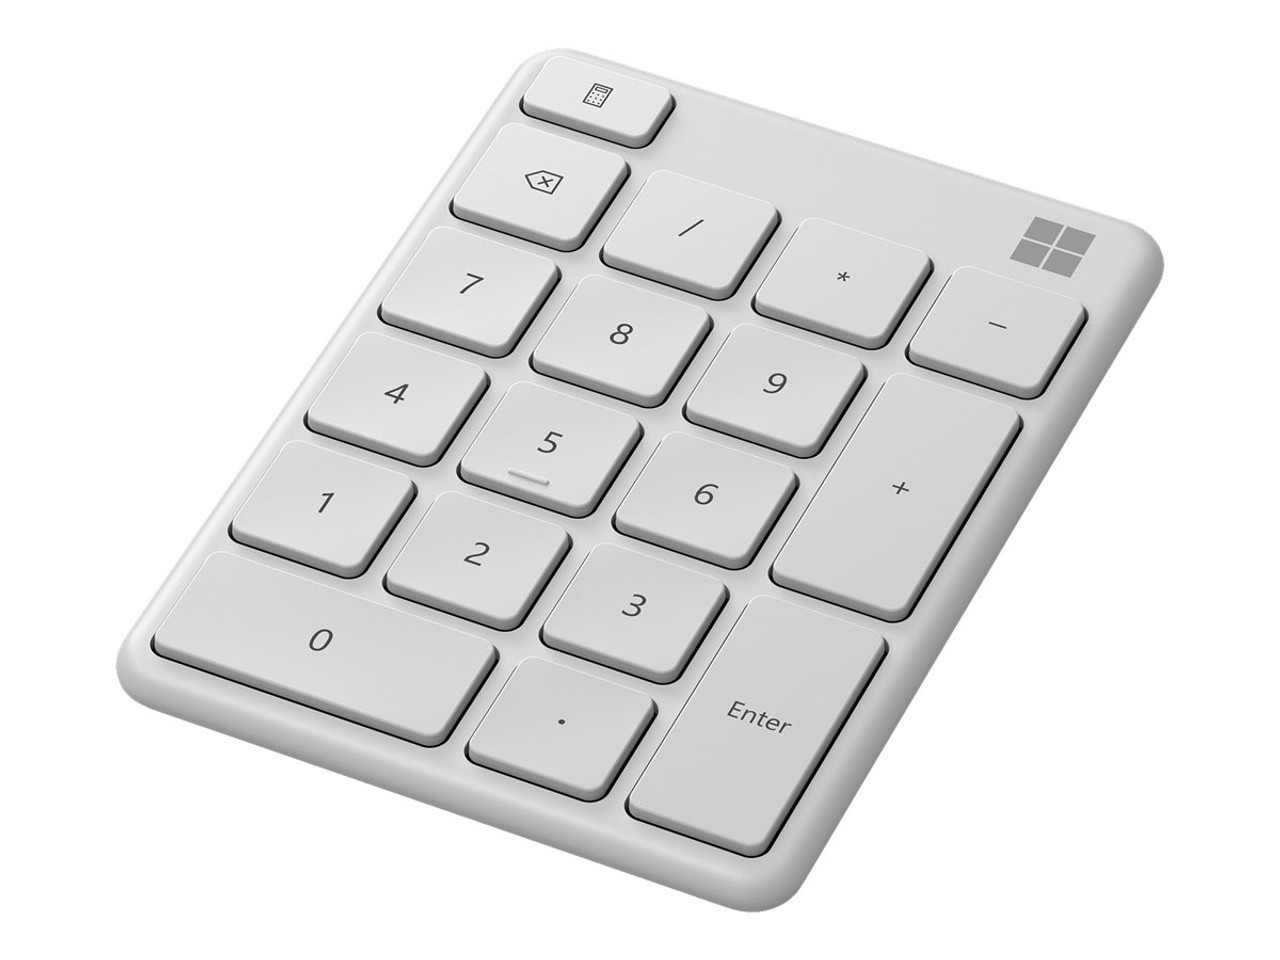 mac compatible keyboard with number pad